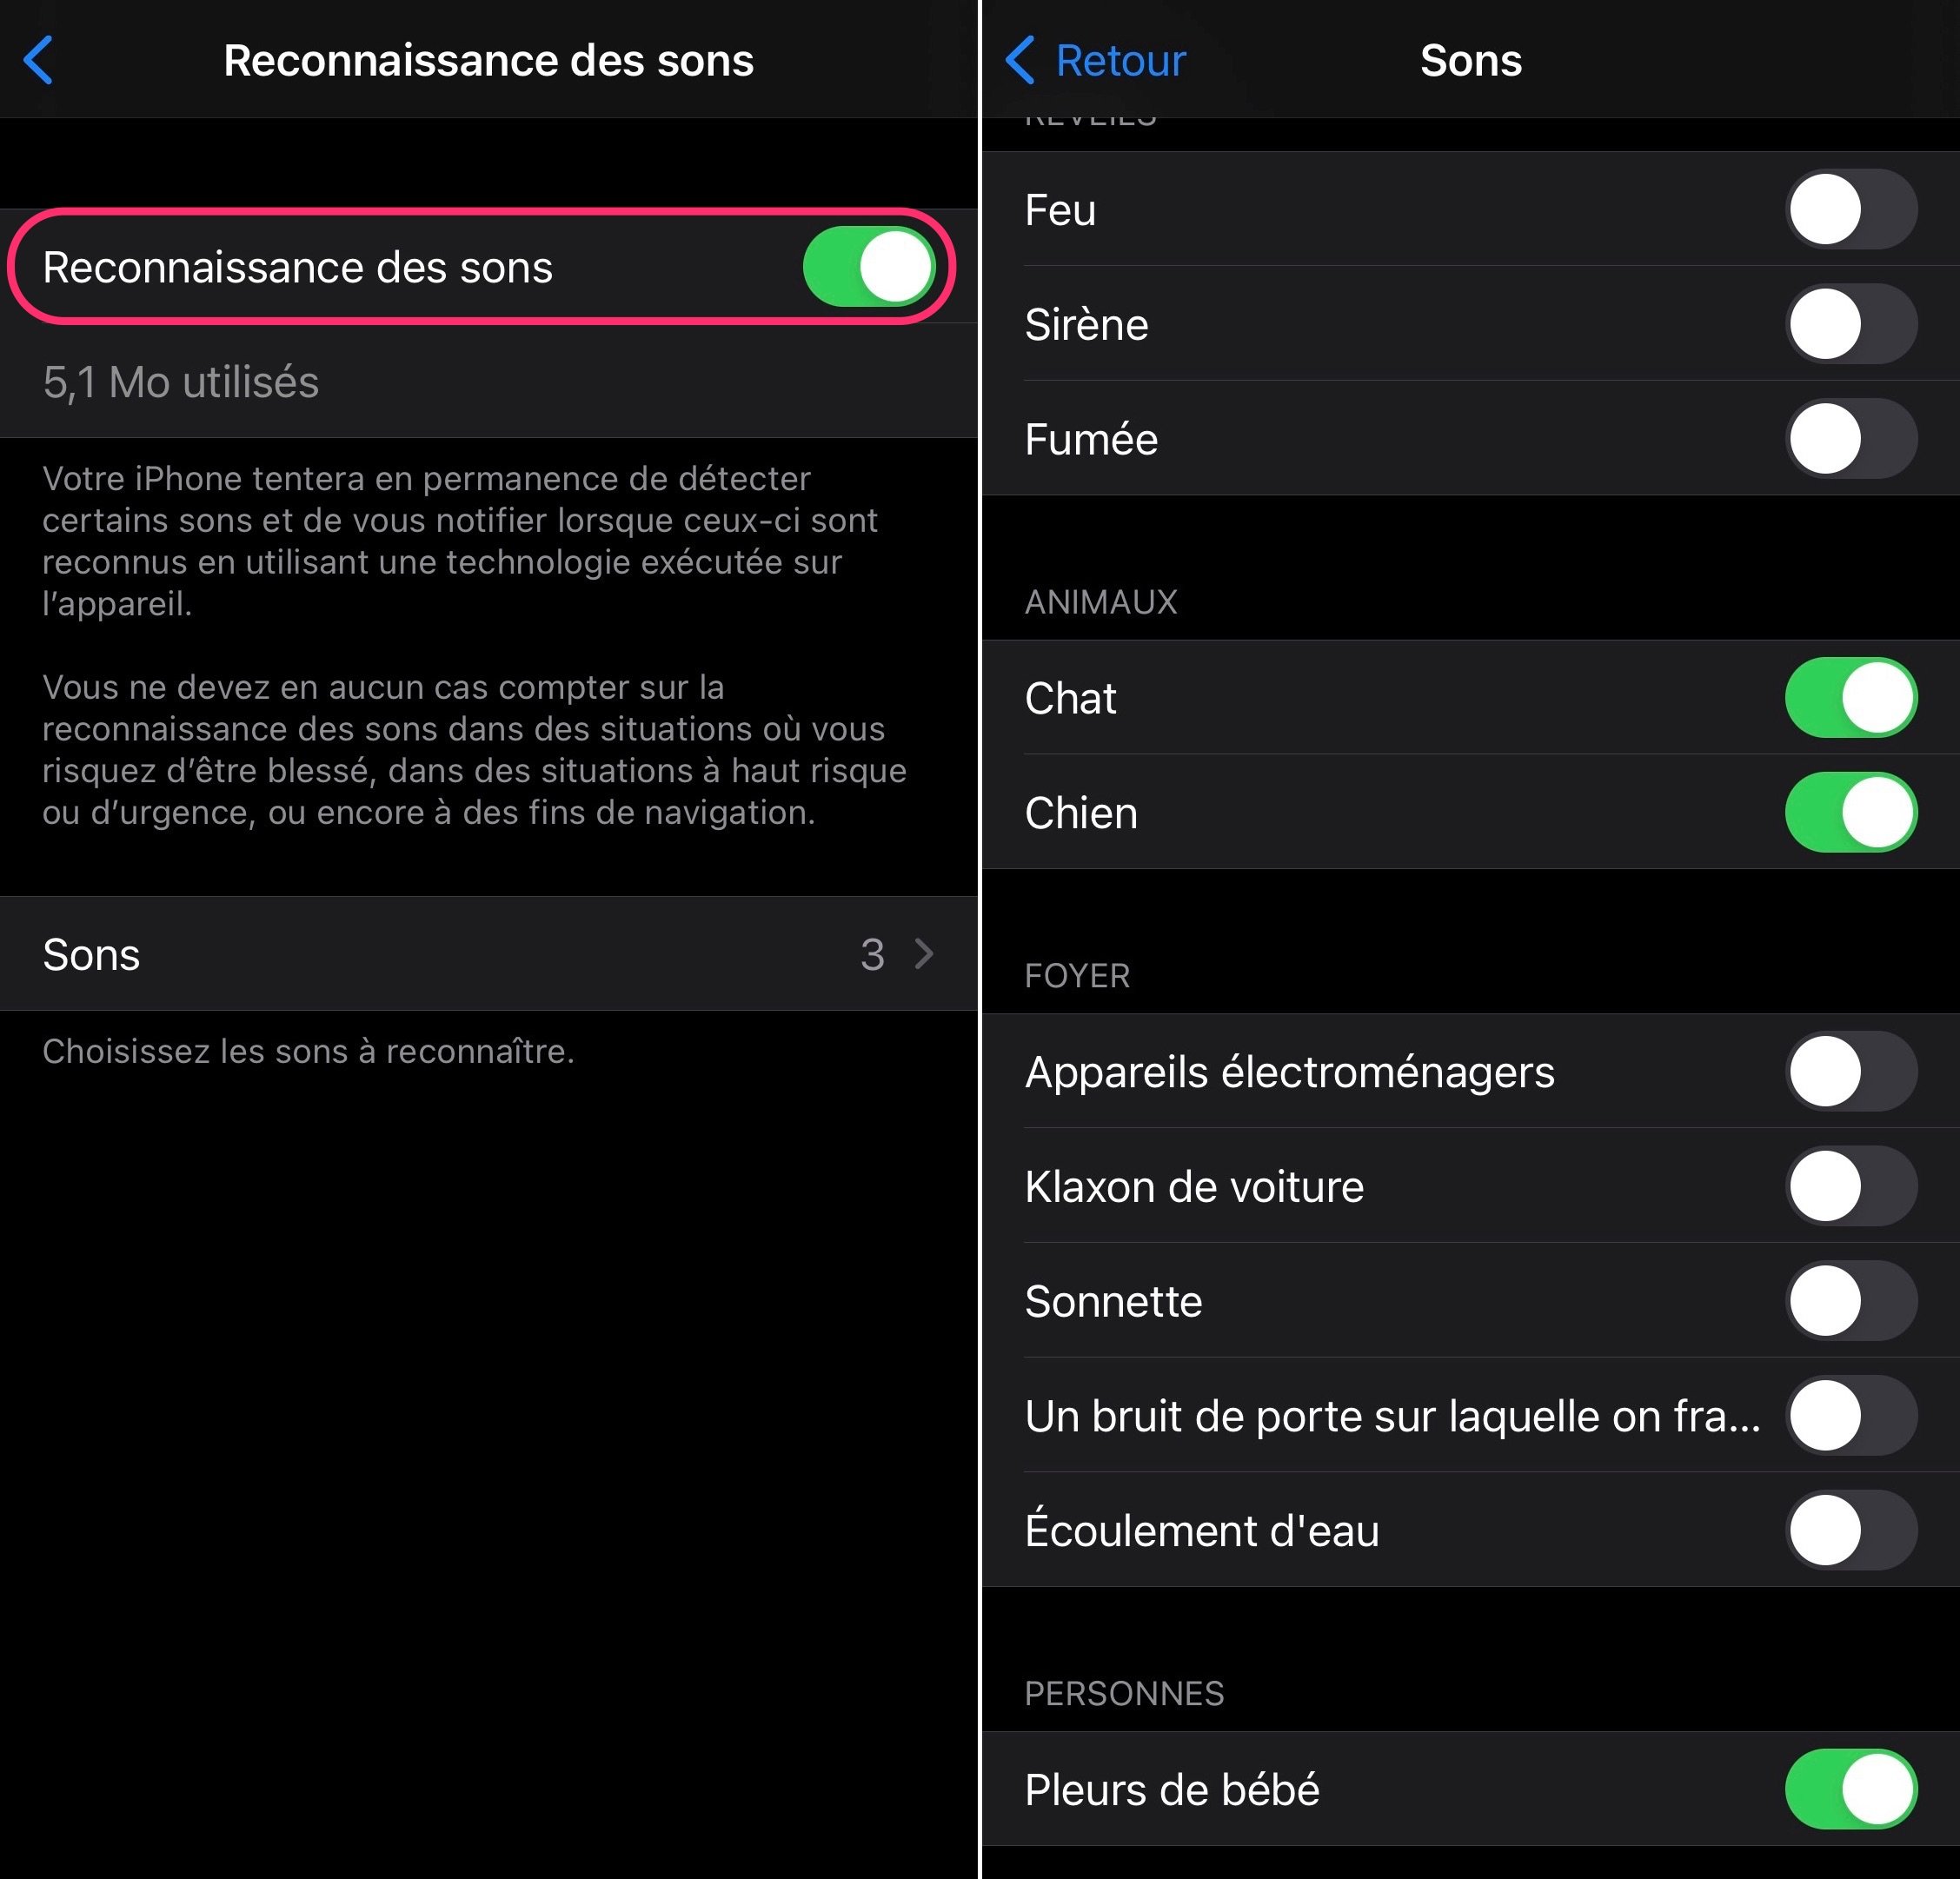 How to Enable iOS 14 Sound Recognition Feature